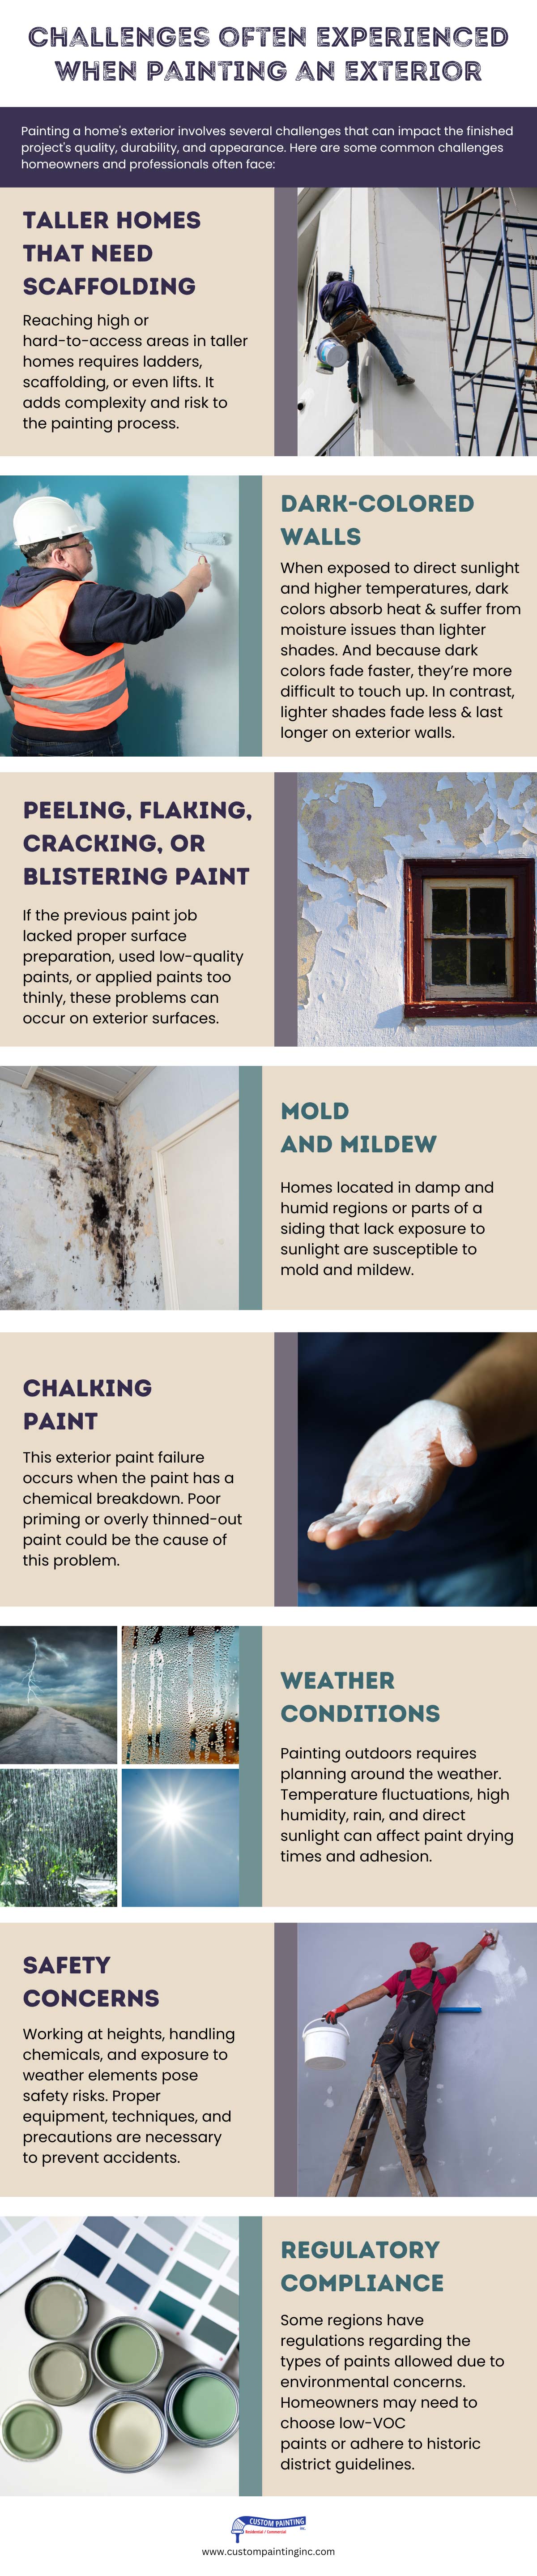 Challenges often experienced when painting an exterior